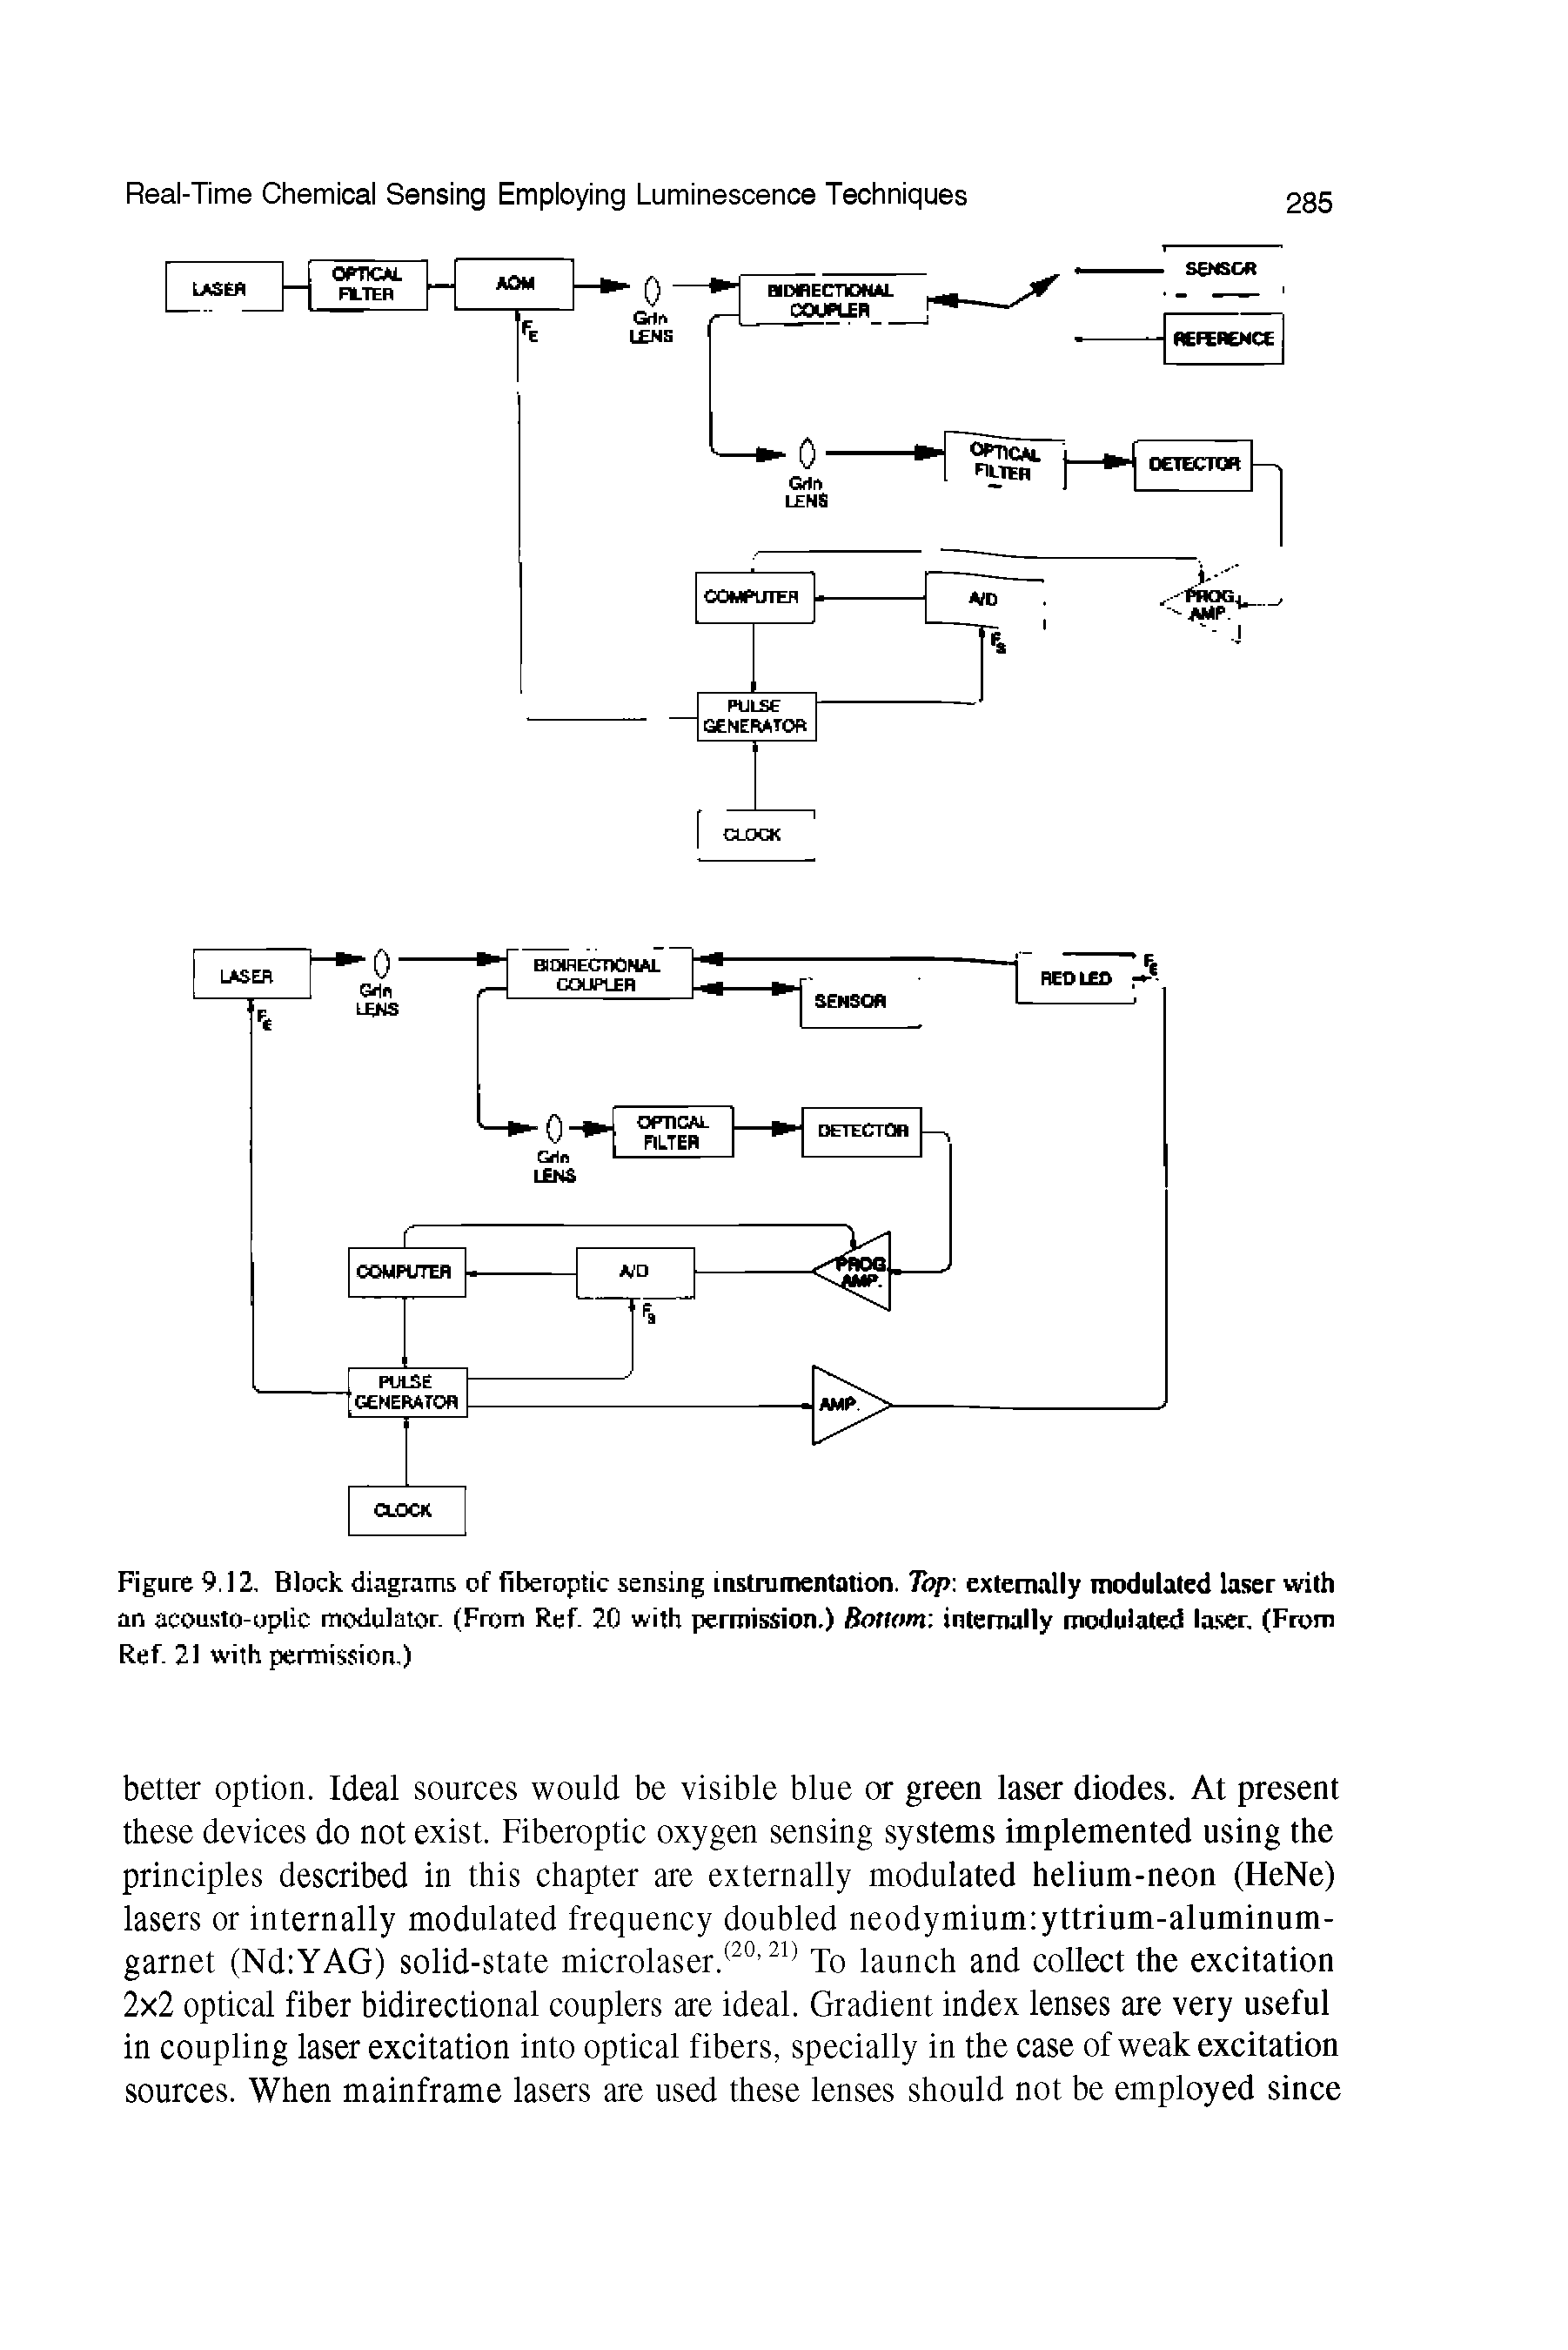 Figure 9.12. Block diagrams of fiberoptic sensing instrumentation Top externally modulated laser with an acousto-optic modulator. (From Ref. 20 with permission.) Bottom internally modulated laser, (From Ref. 21 with permission.)...